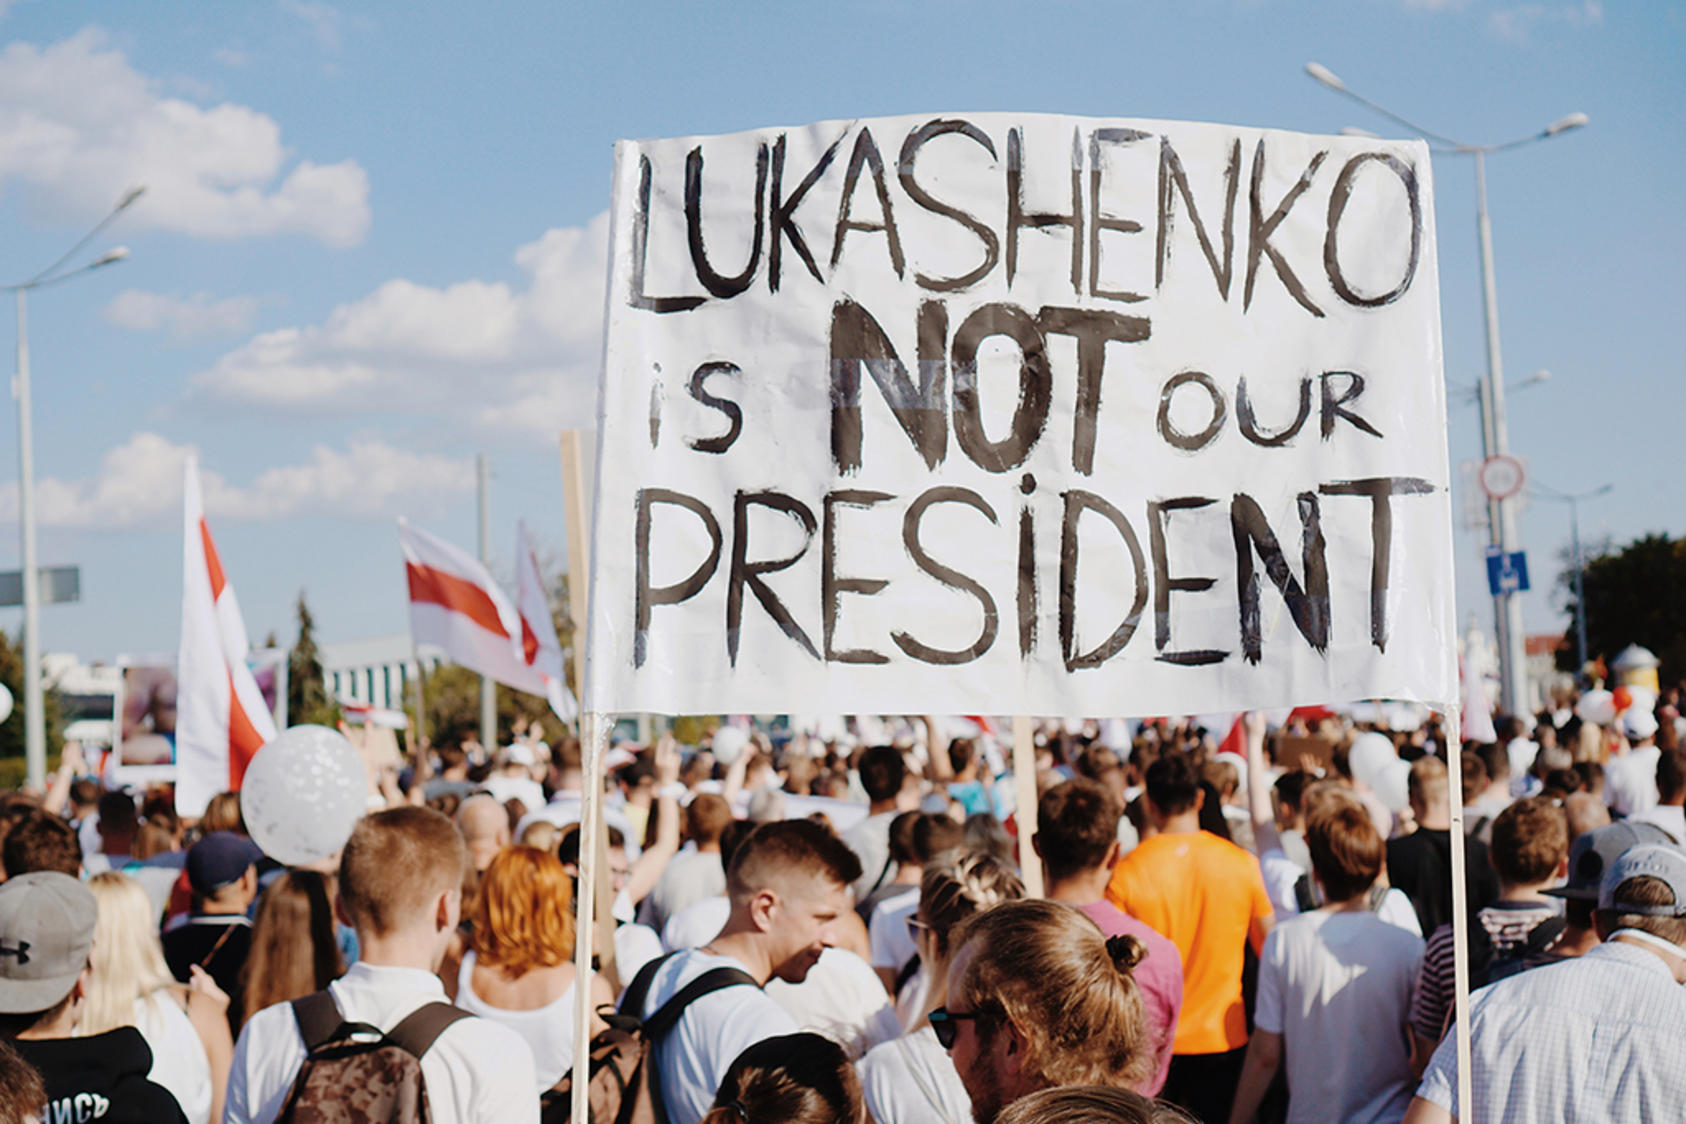 Protesters in Minsk, Belarus, gathered to demonstrate in support of the removal of Lukashenko from the office of President after claims that his government conducted vote-rigging during the 2020 presidential election. (Photo: Pexels, Artem Podrez).